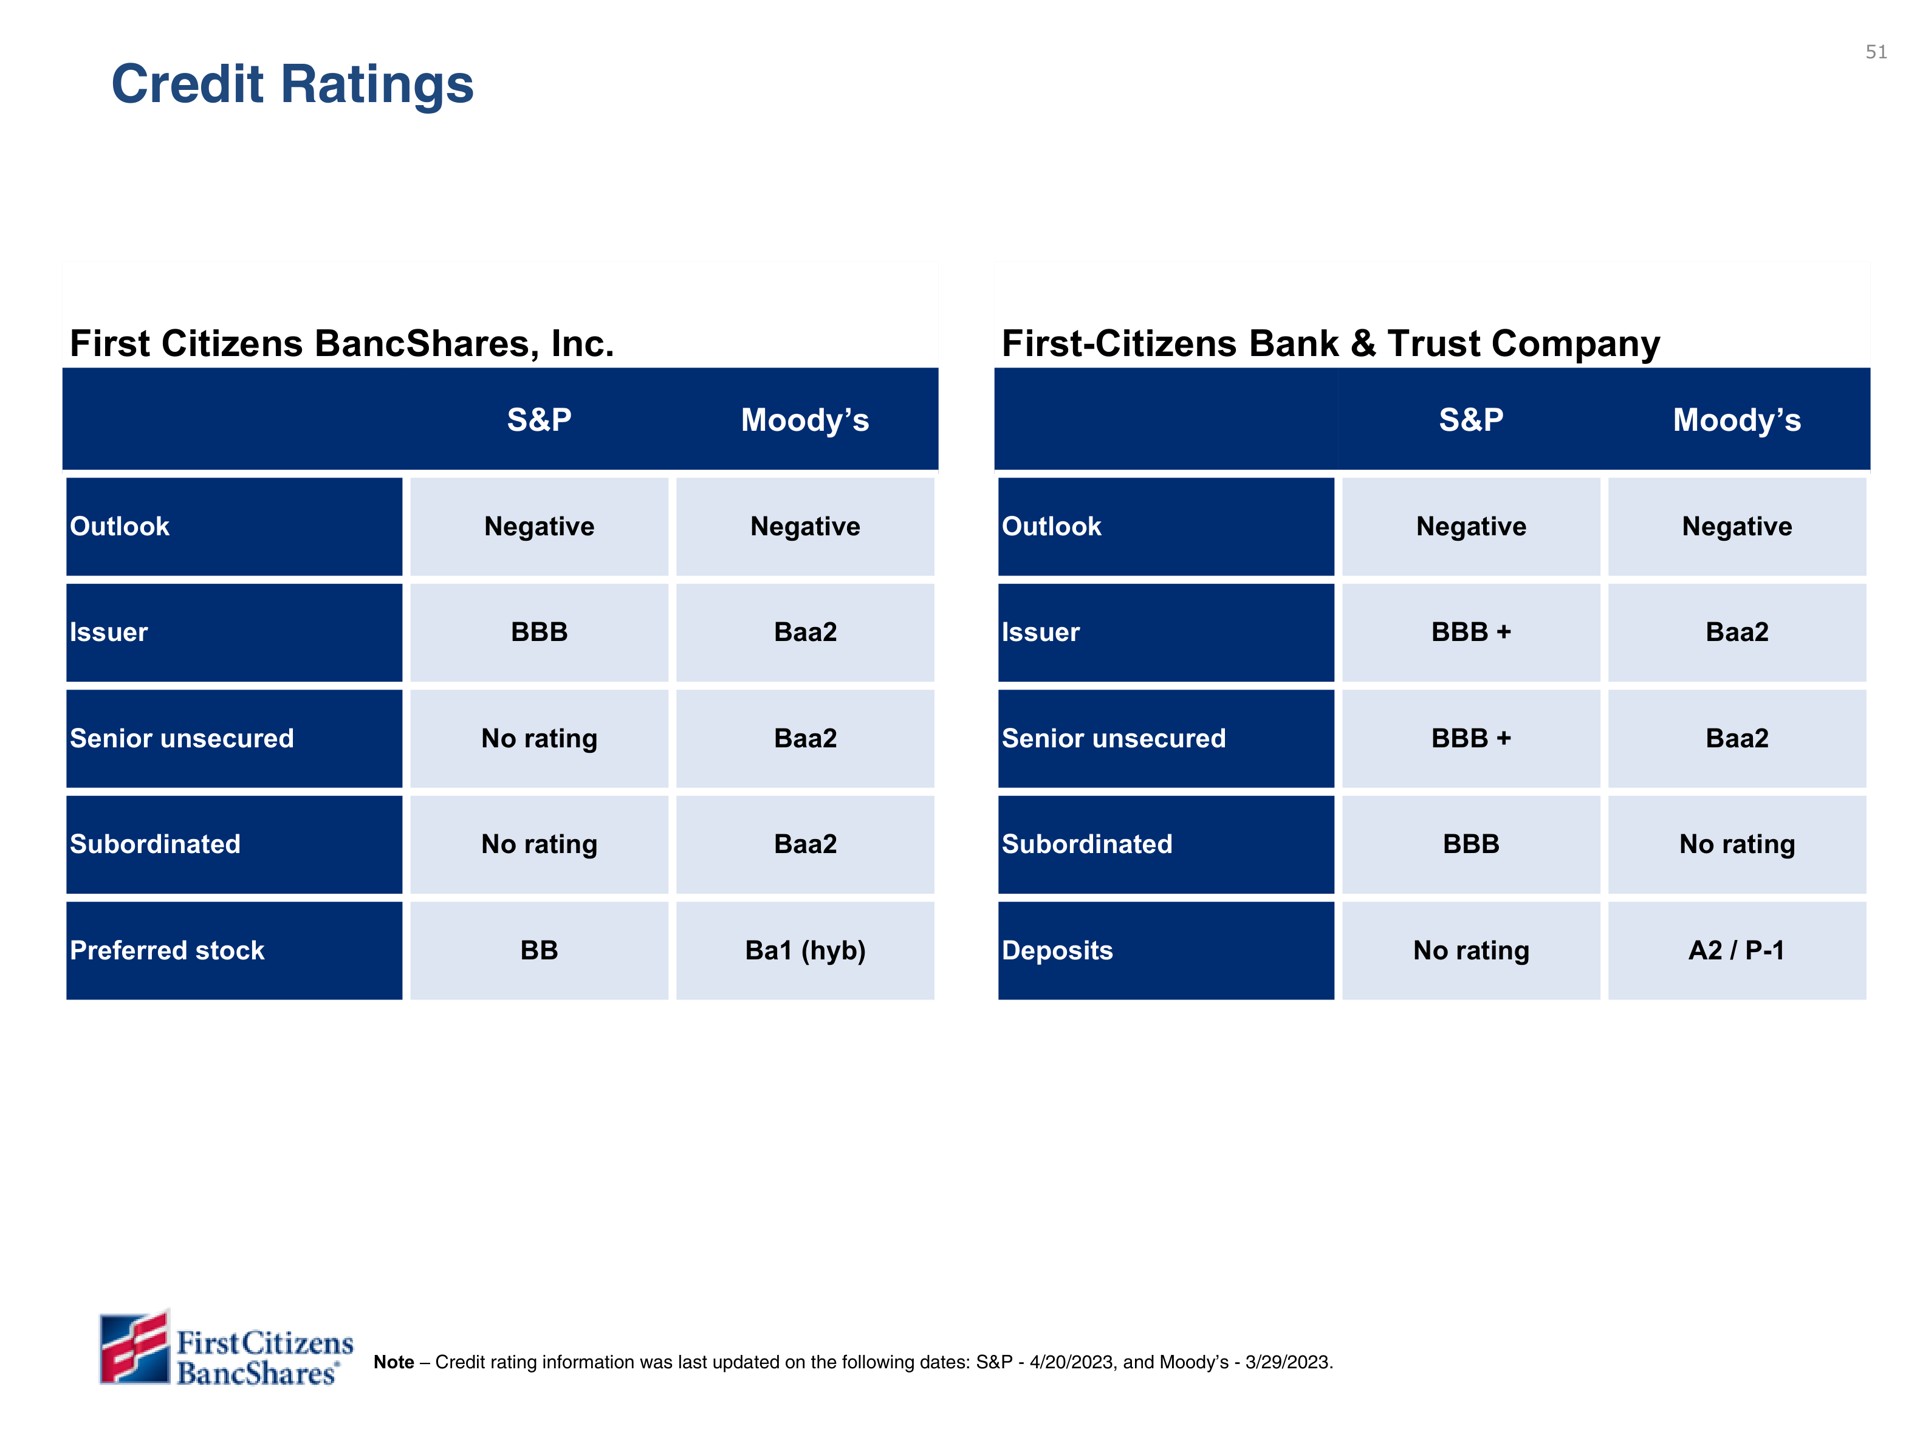 credit ratings first citizens bank trust company | First Citizens BancShares